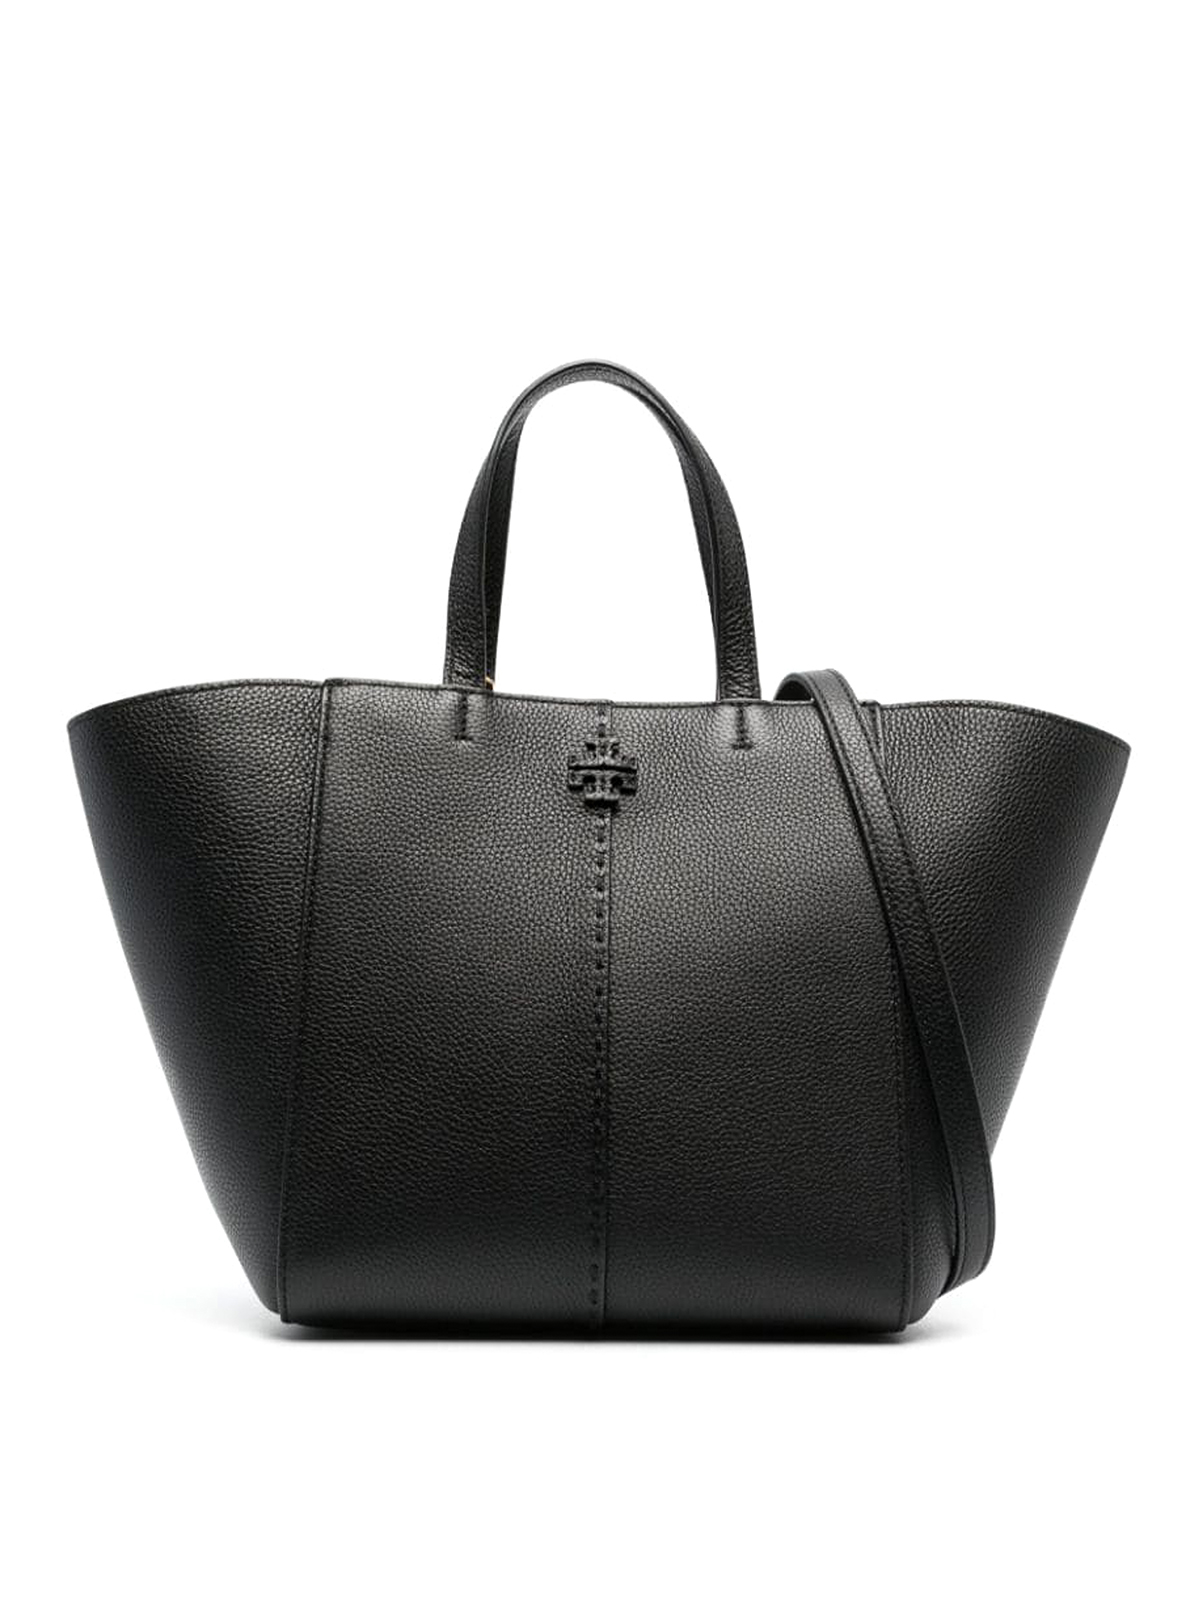 Shop Tory Burch Mcgraw Leather Tote Bag In Black